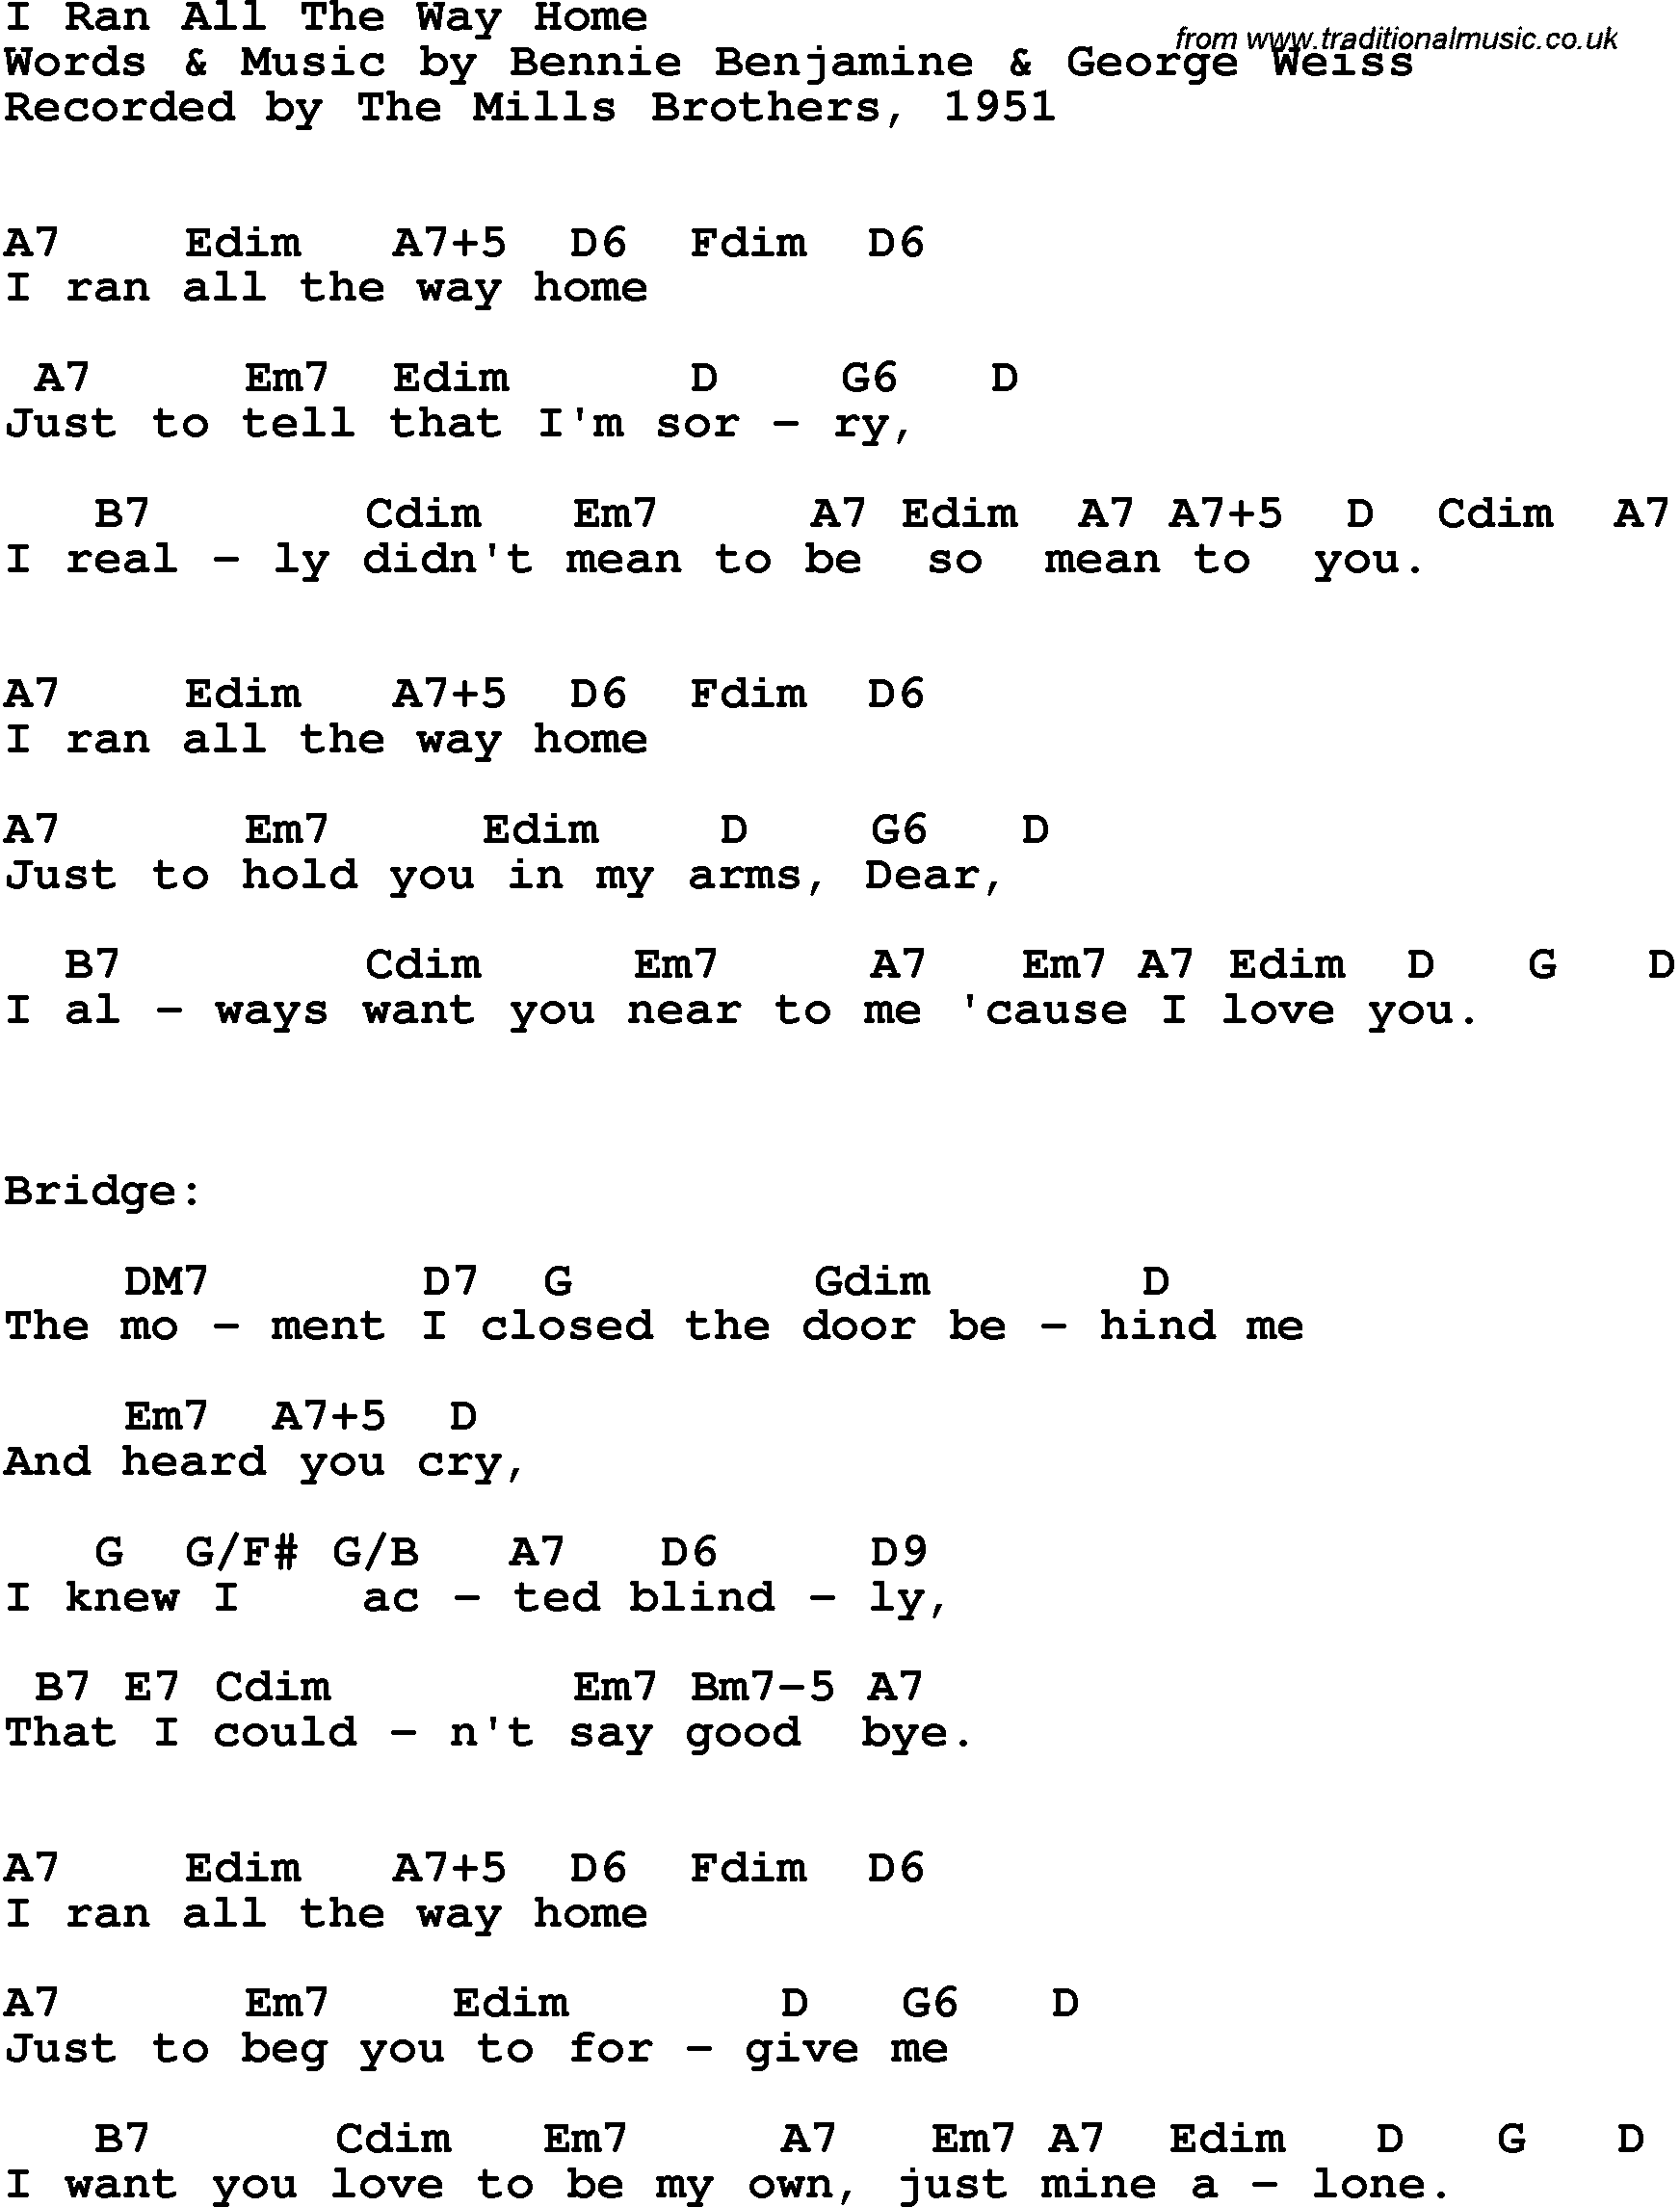 Song Lyrics with guitar chords for I Ran All The Way Home - The Mills Brothers, 1951